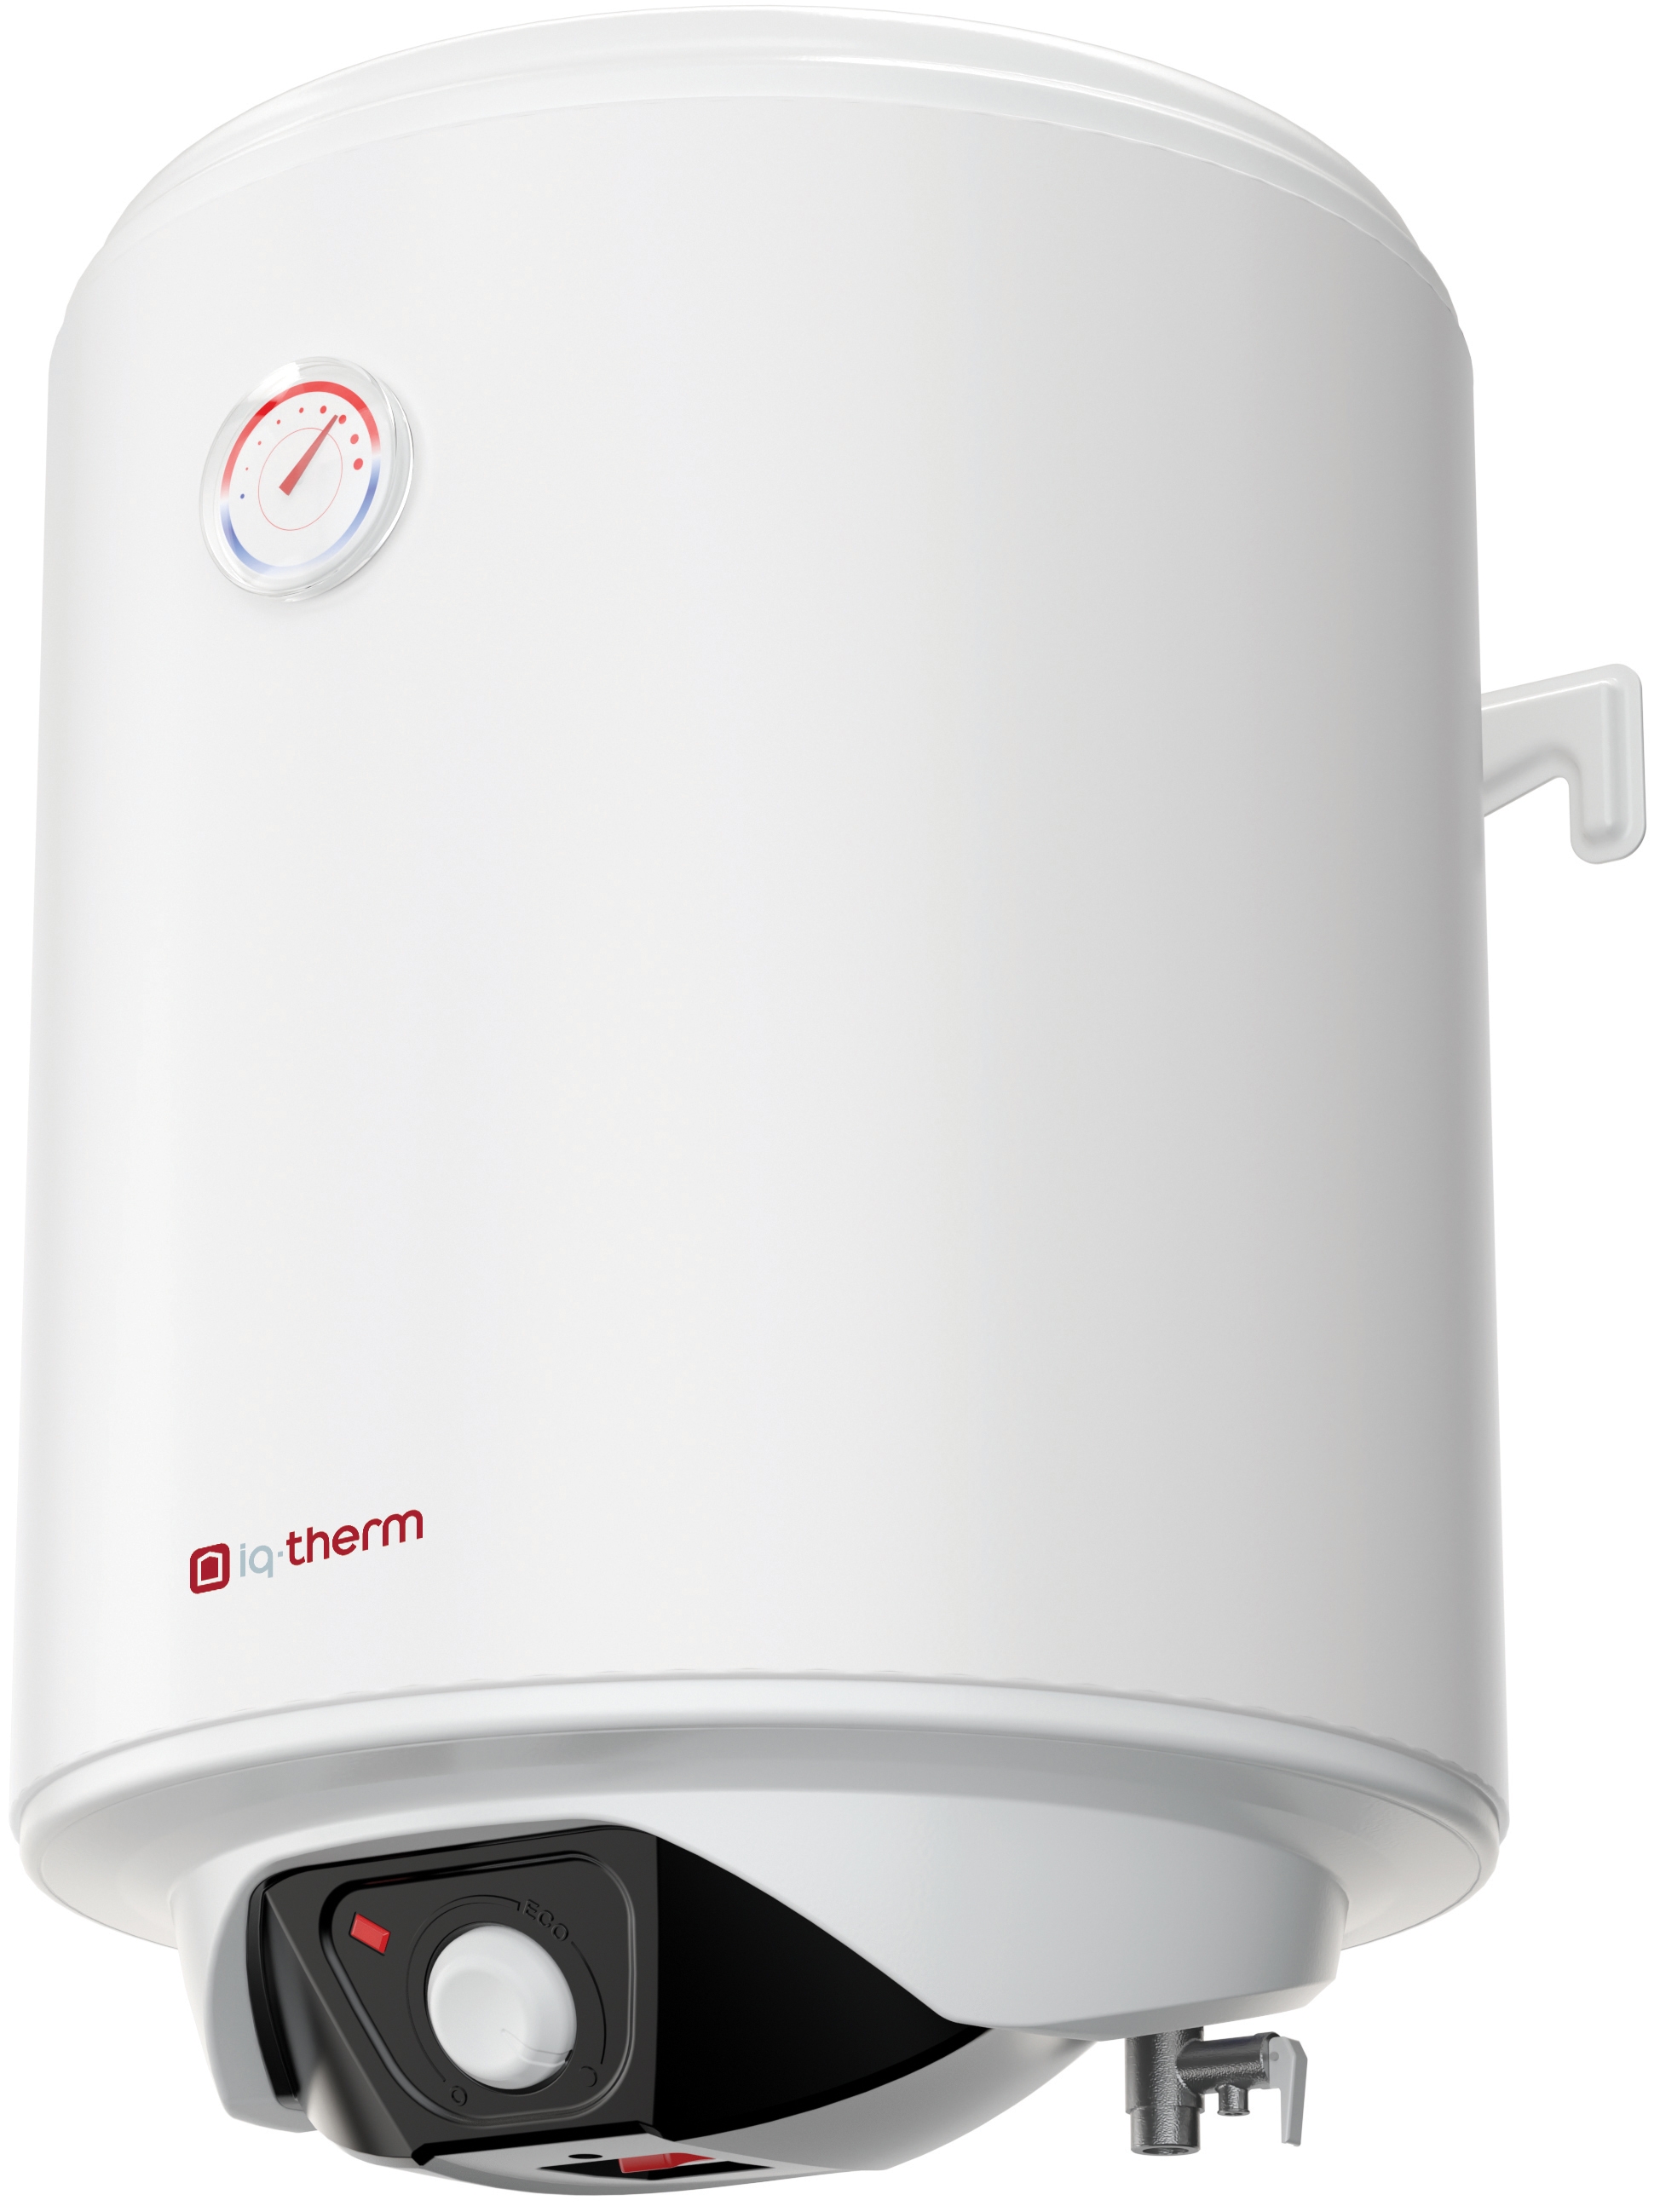 Бойлер IQ-therm Classic-CLV050DRY